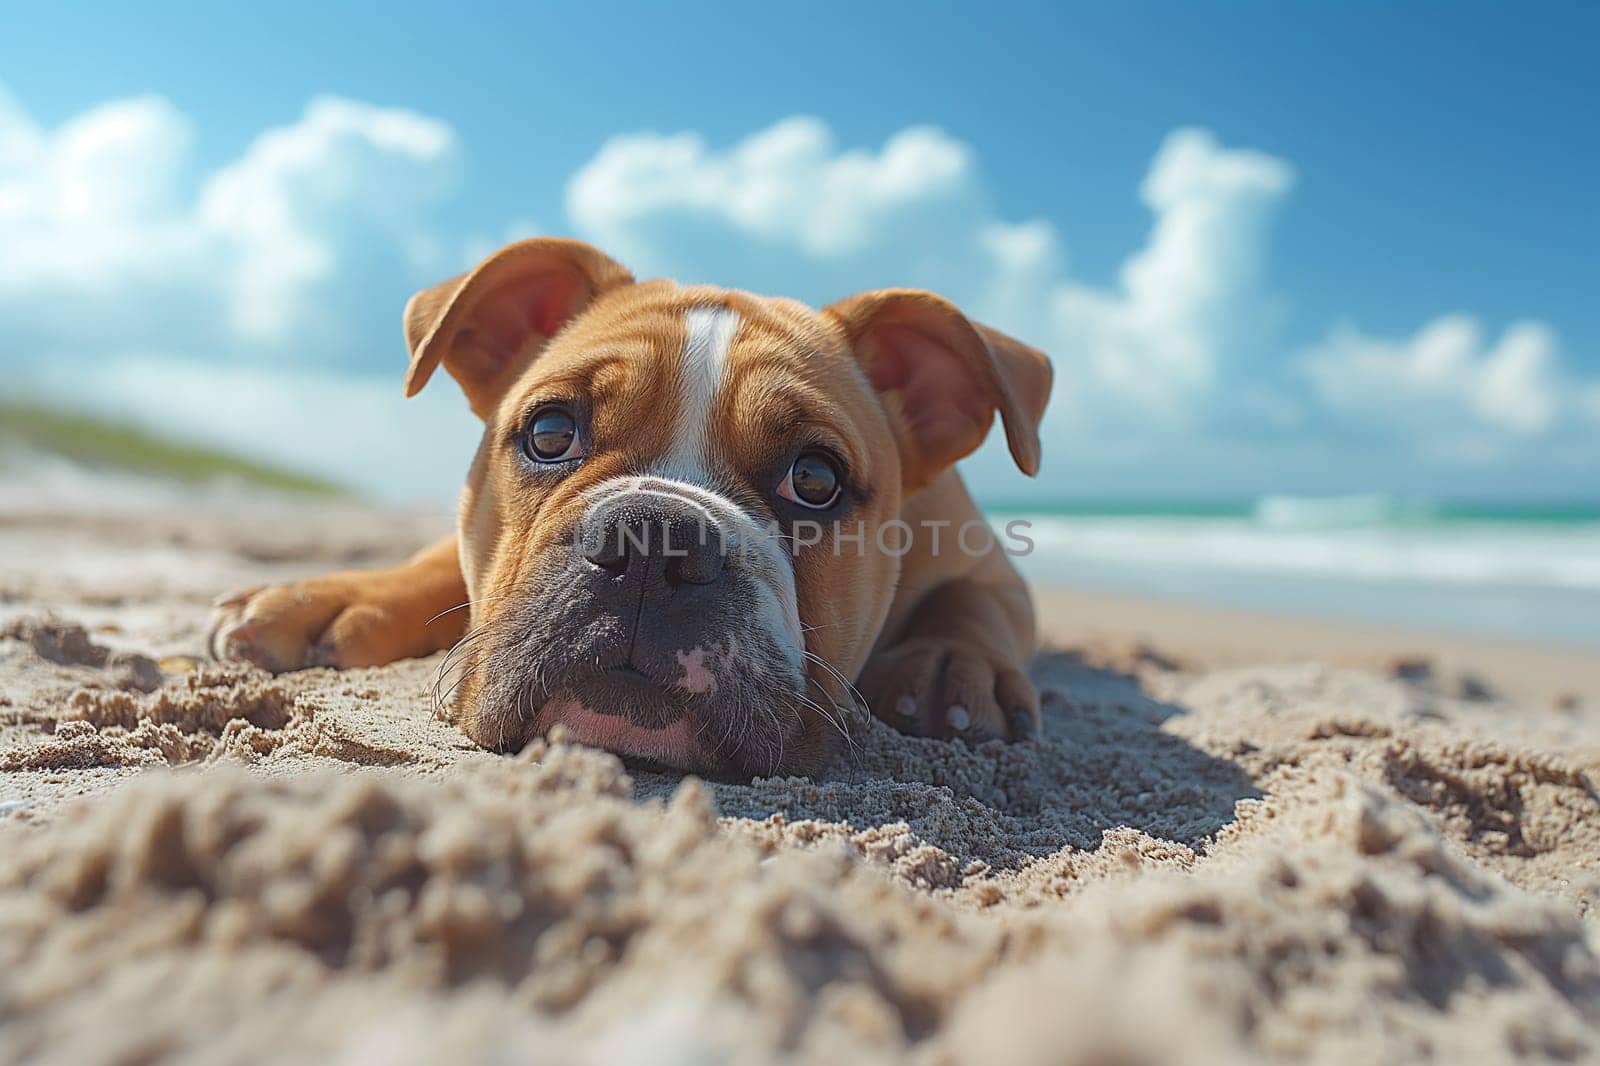 A French Bulldog relaxing on the beach during sunset by Hype2art